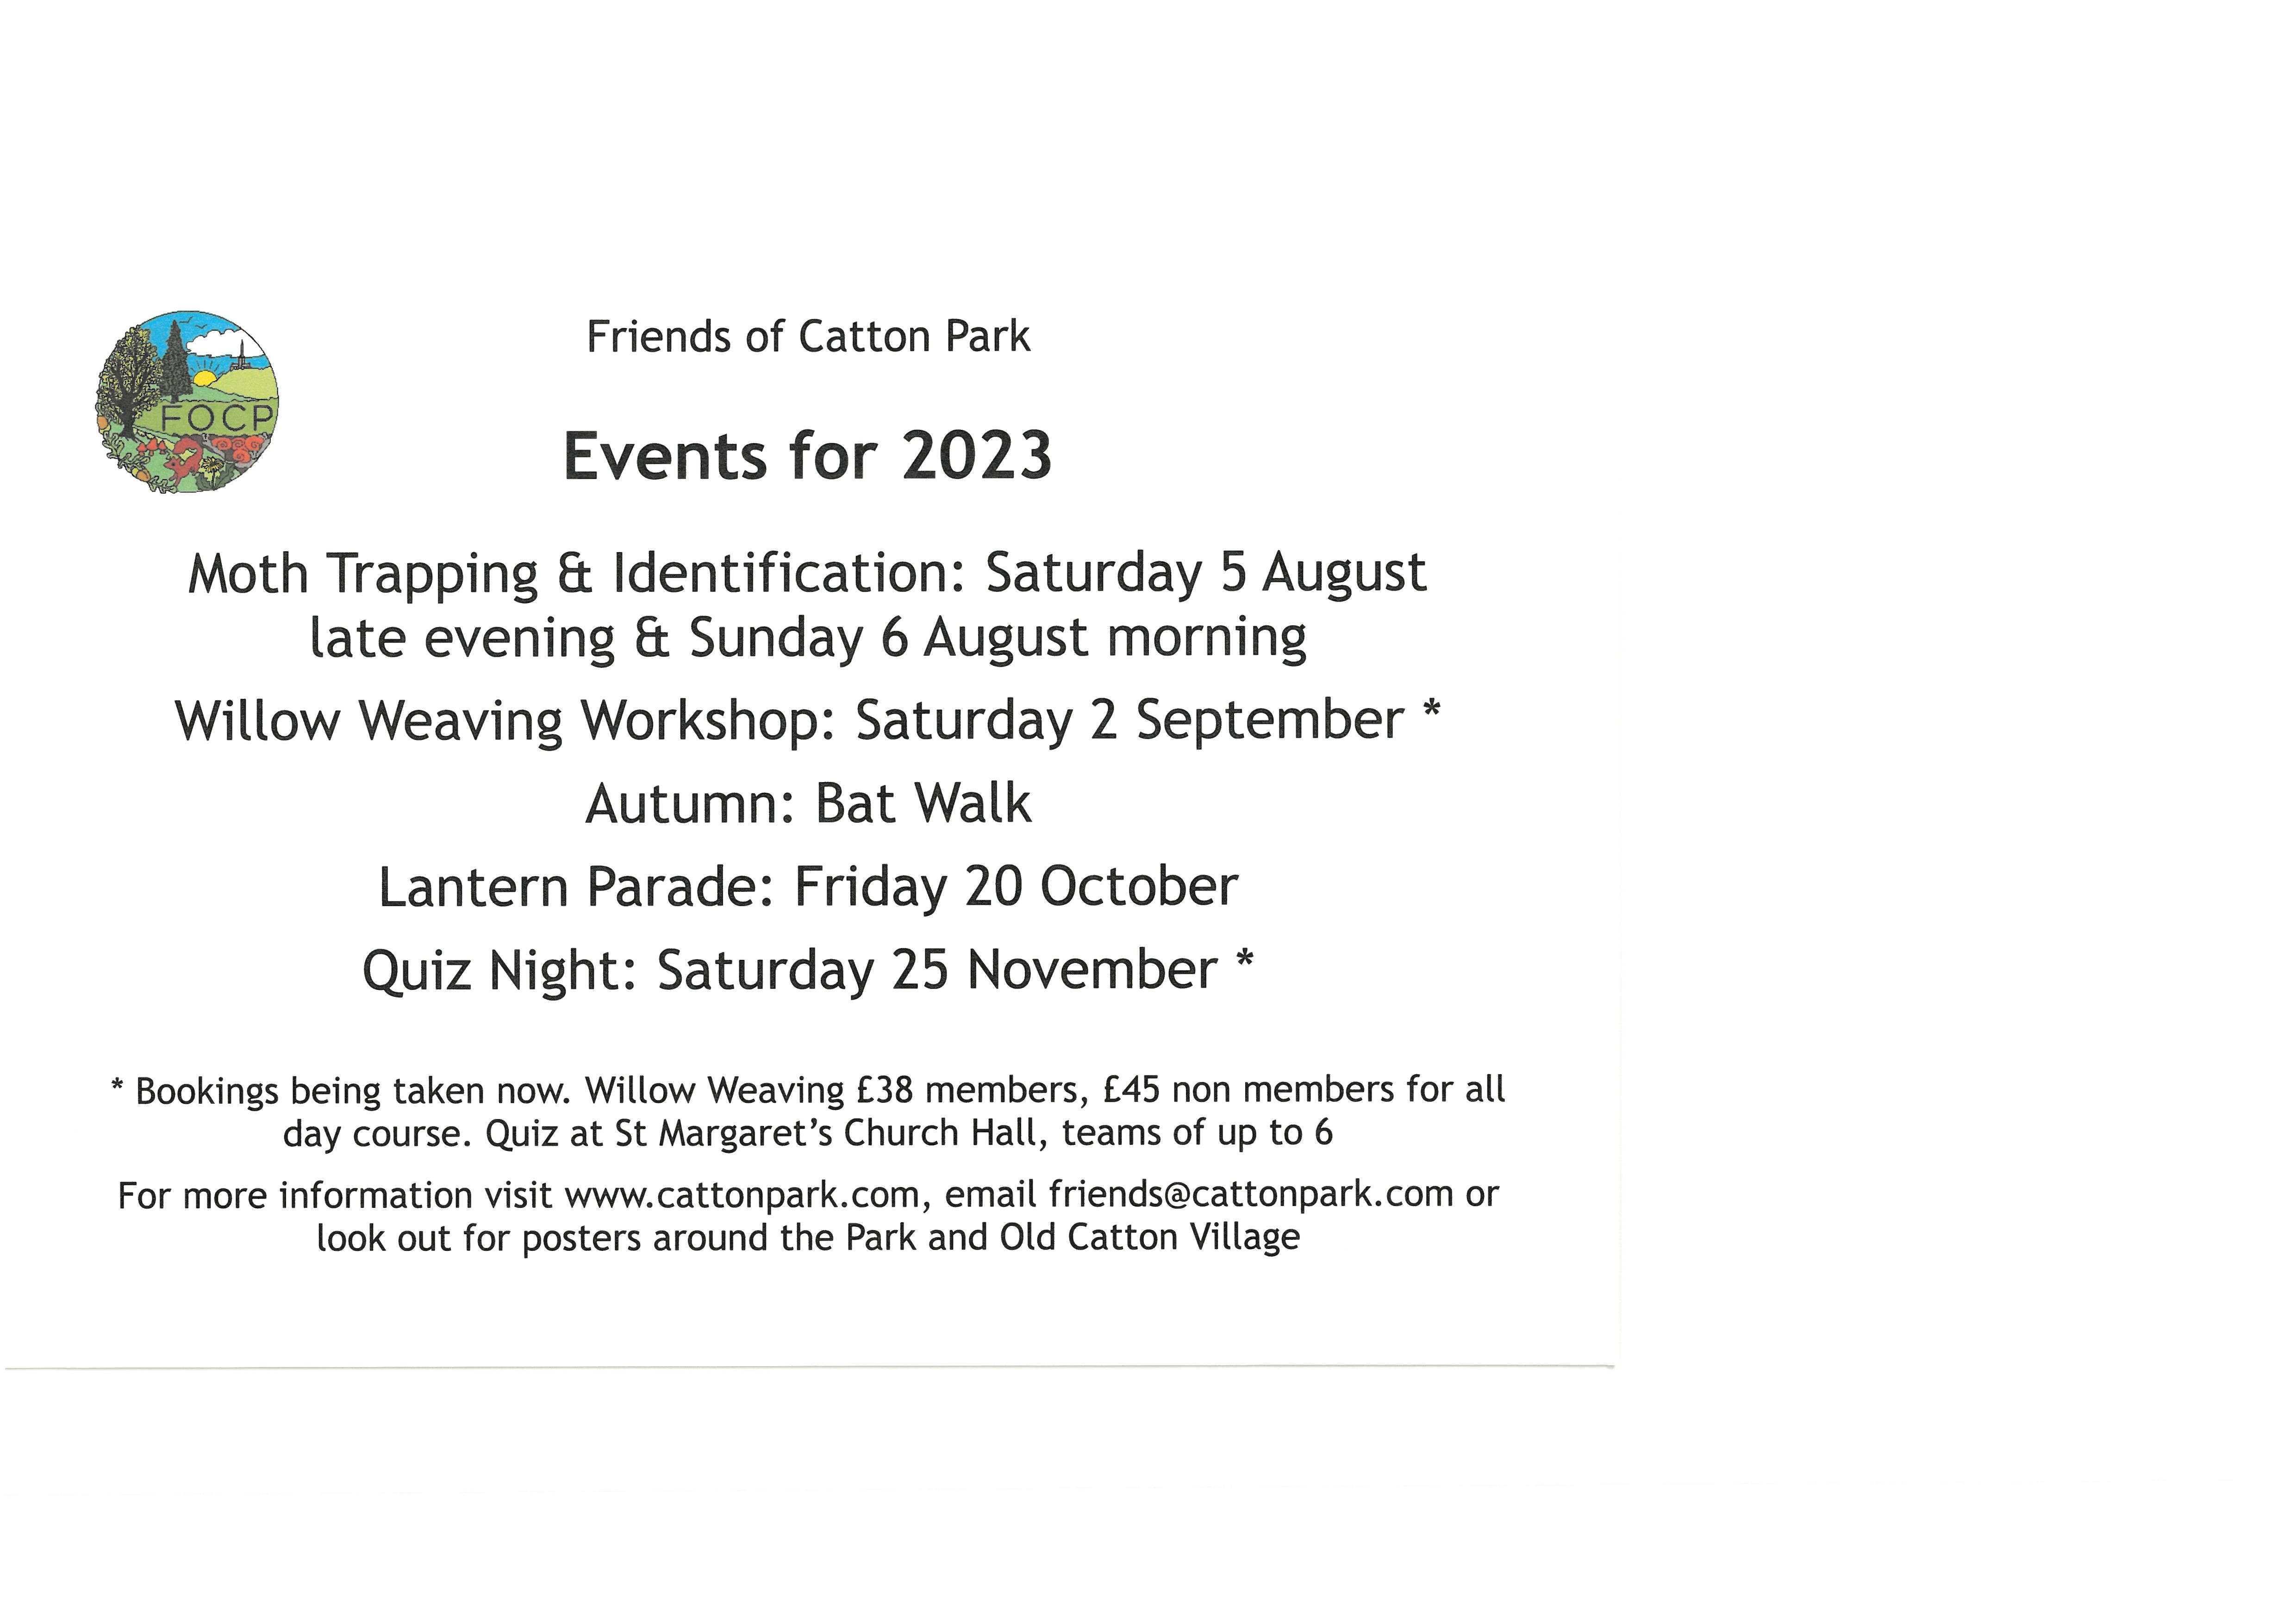 Friends of Catton Park - Events for 2023